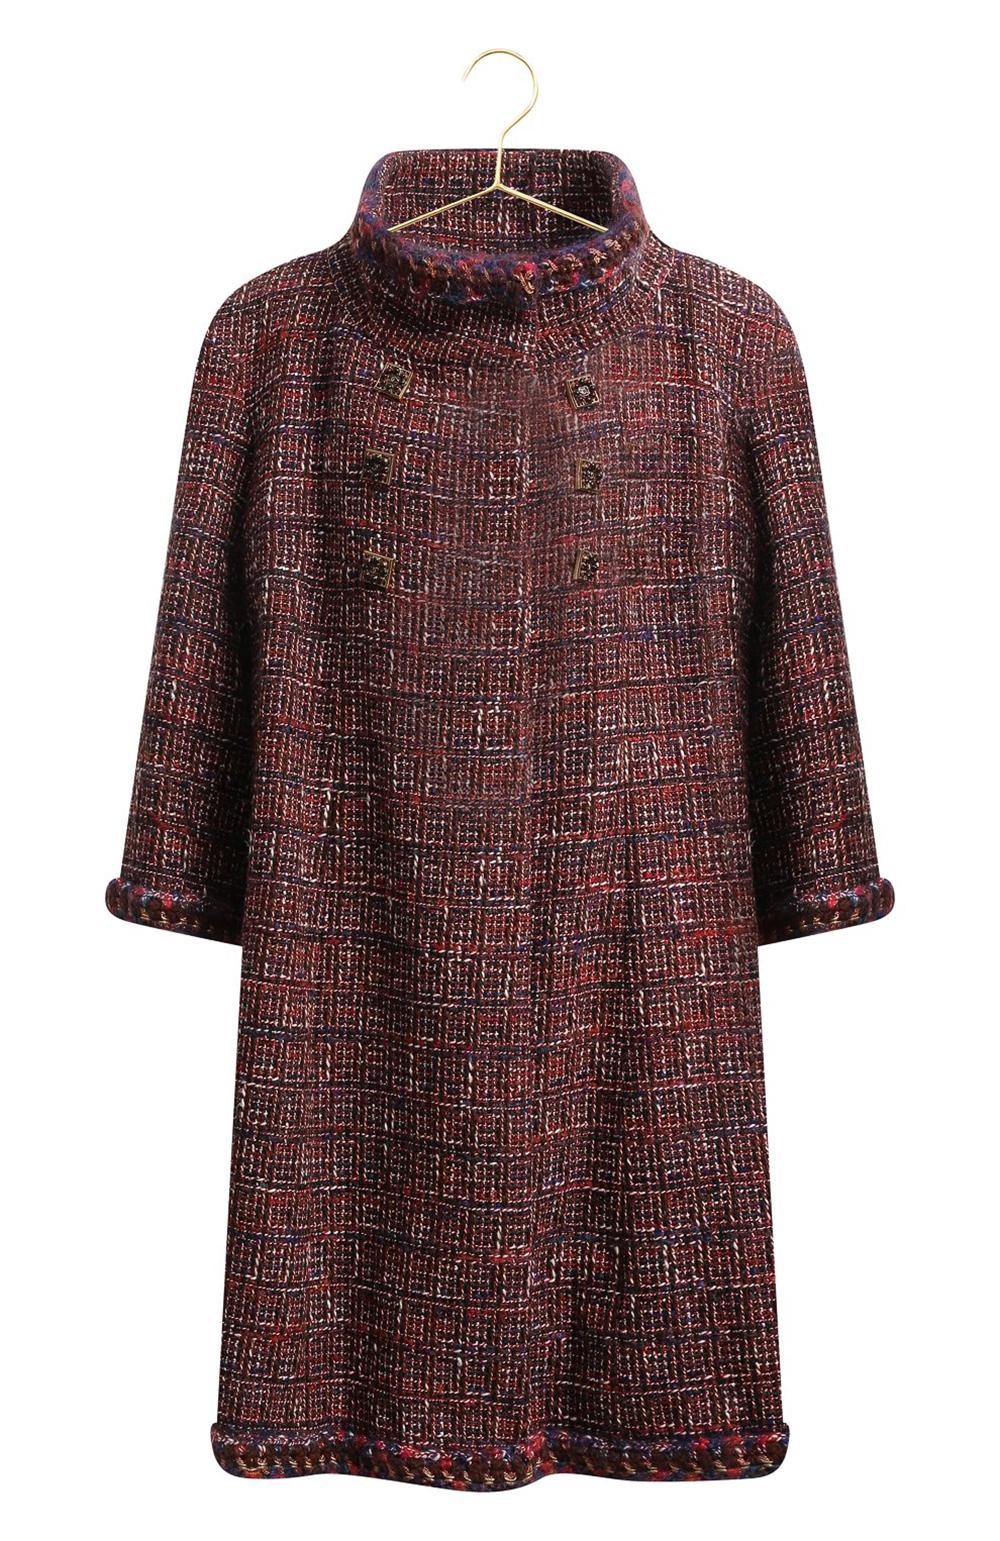 Chanel Byzance CC Jewel Buttons Runway Coat 1